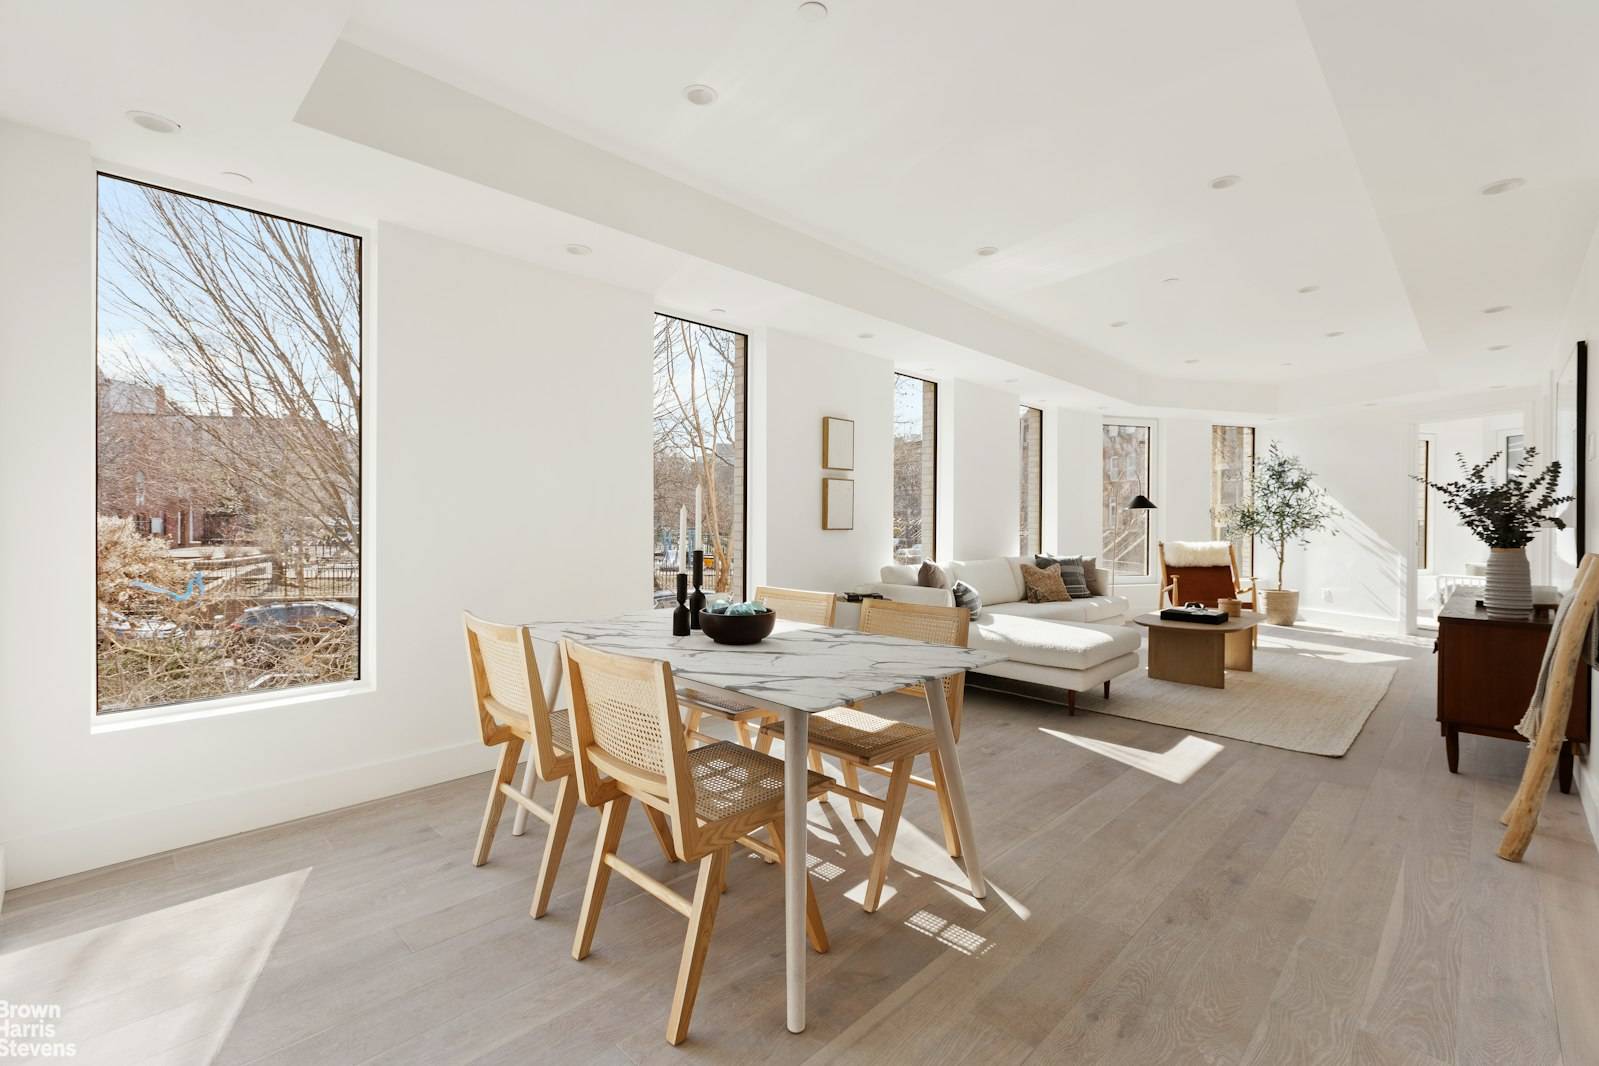 Introducing 319 Prospect Place an exclusive new luxury development nestled in the heart of Prospect Heights, just moments from Grand Army Plaza, Prospect Park, and the iconic Brooklyn Public Library.